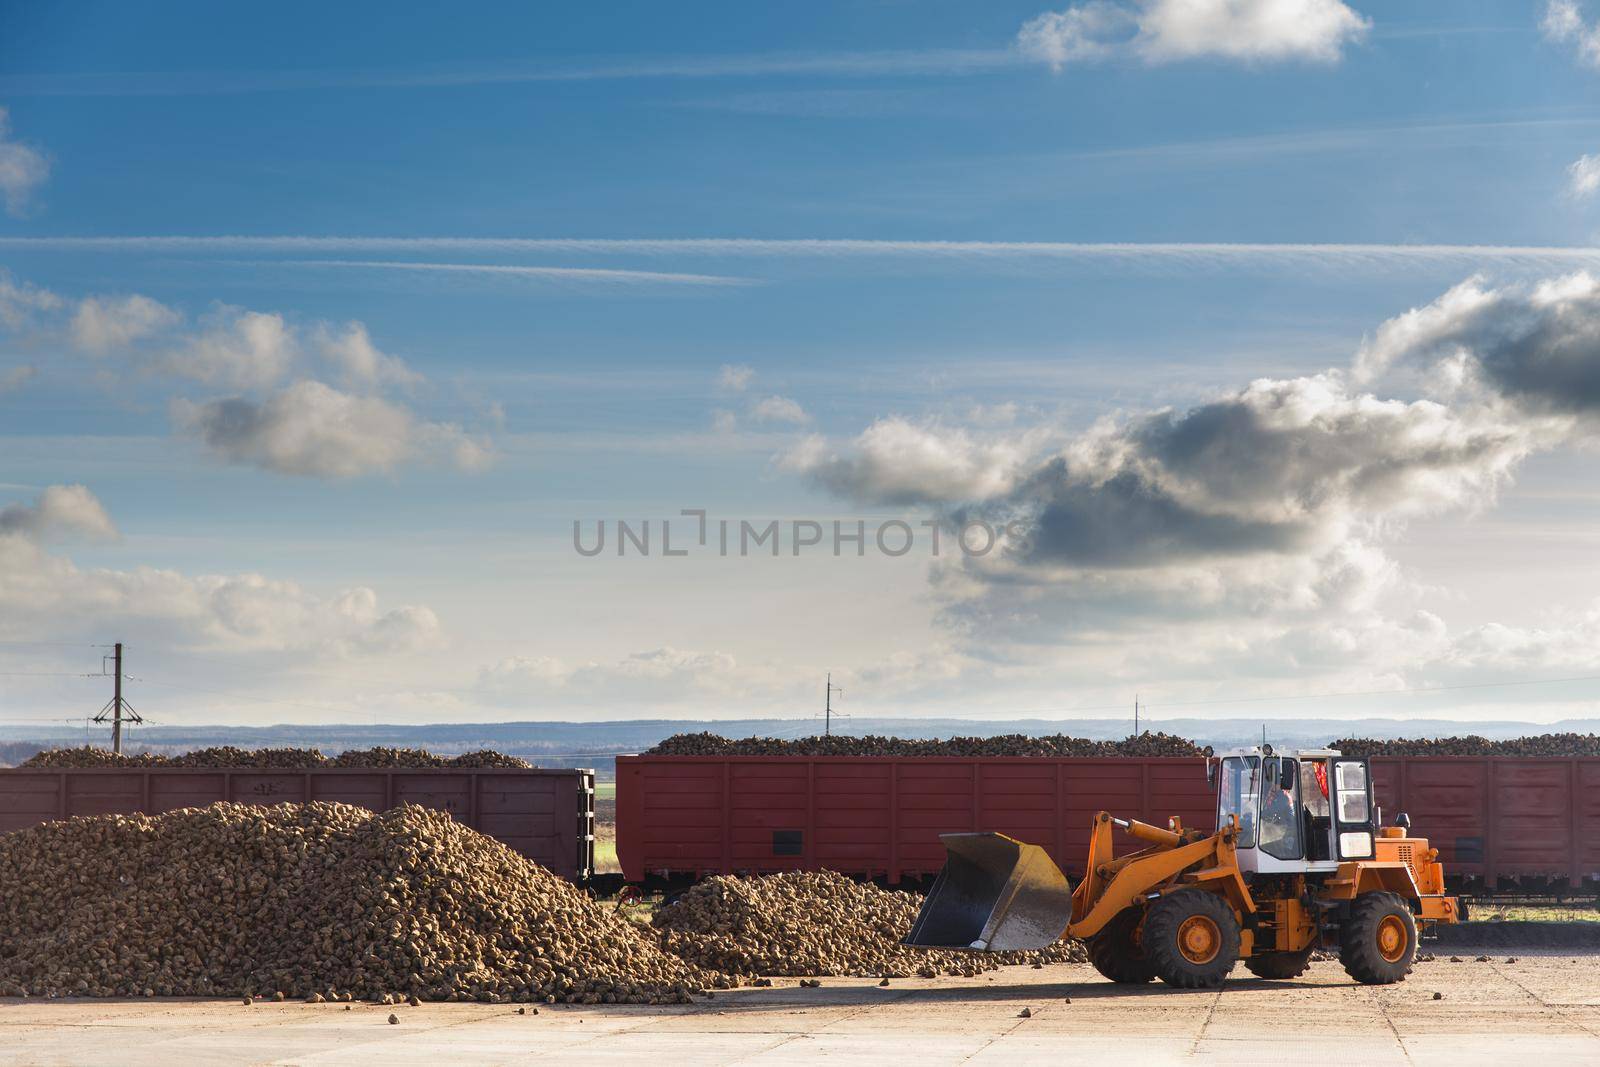 A sugar beet harvest in progress - Tractor loads sugar beet into the train cars to be sent to the sugar factory. Sugar industry is one of the priority directions of social and economic development of the Republic of Belarus